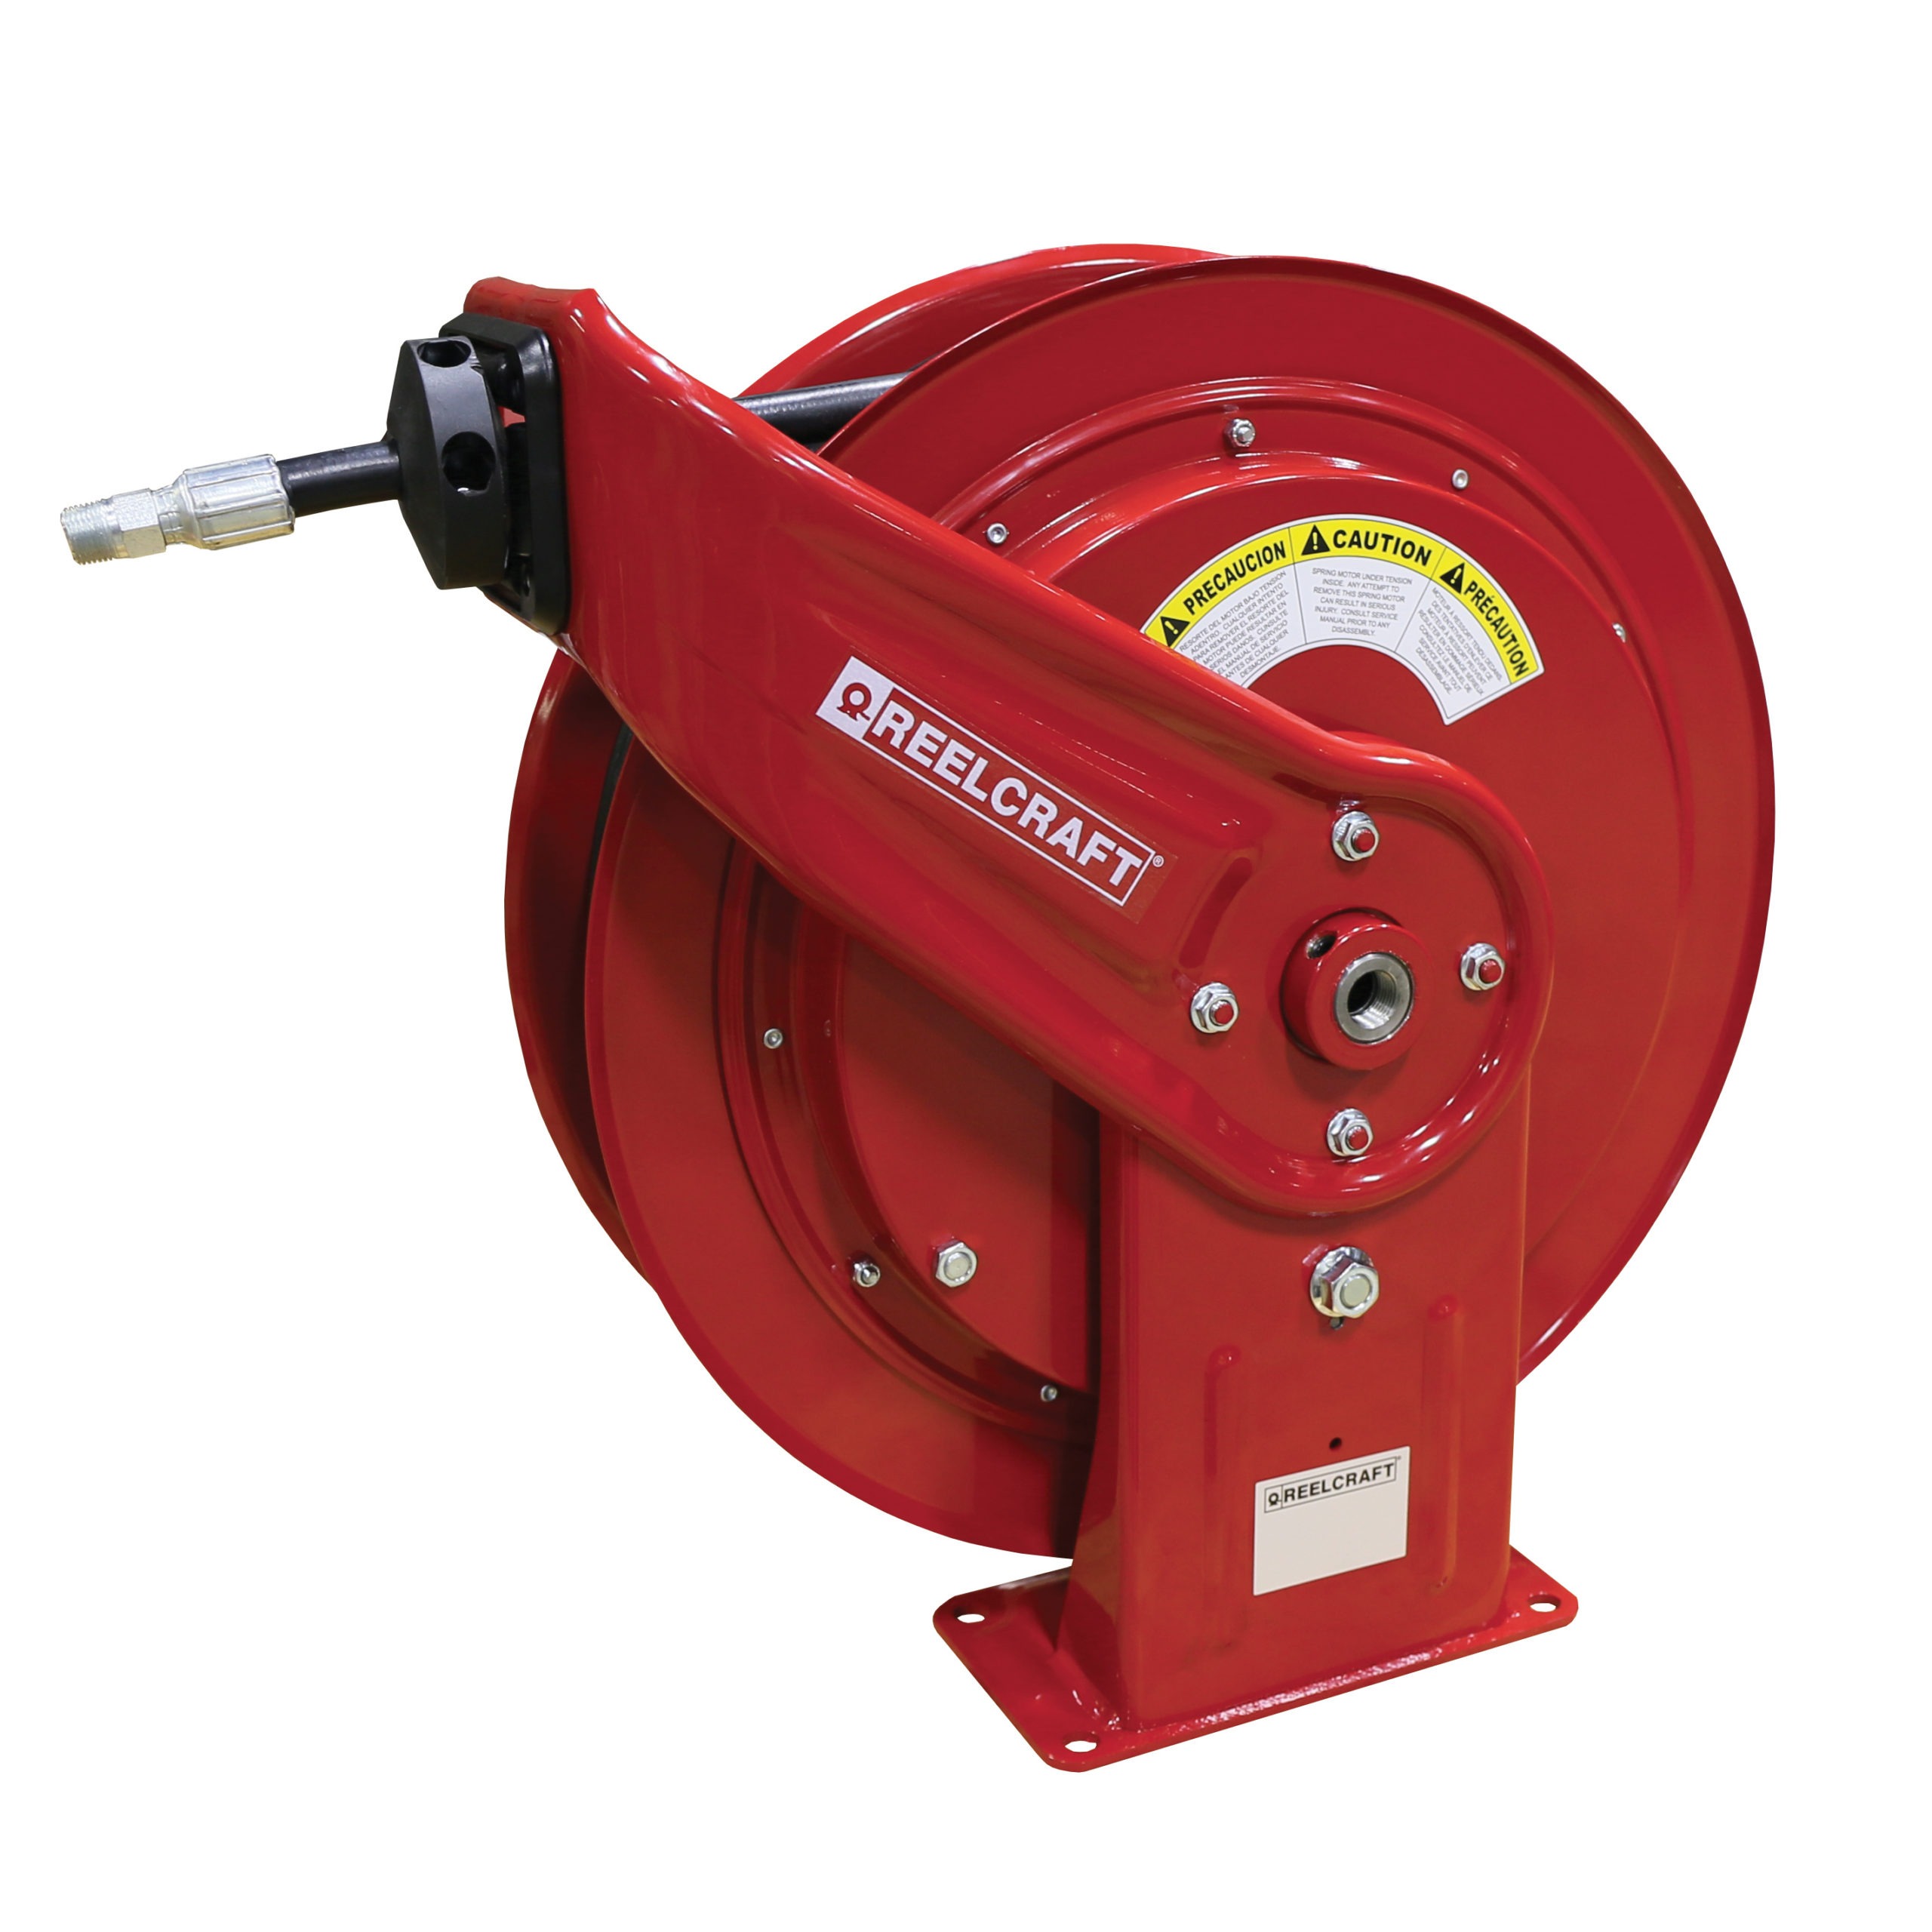 Reelcraft HD74100 OHP - 1/4 in. x 100 ft. Heavy Duty Mobile Base Hose Reel